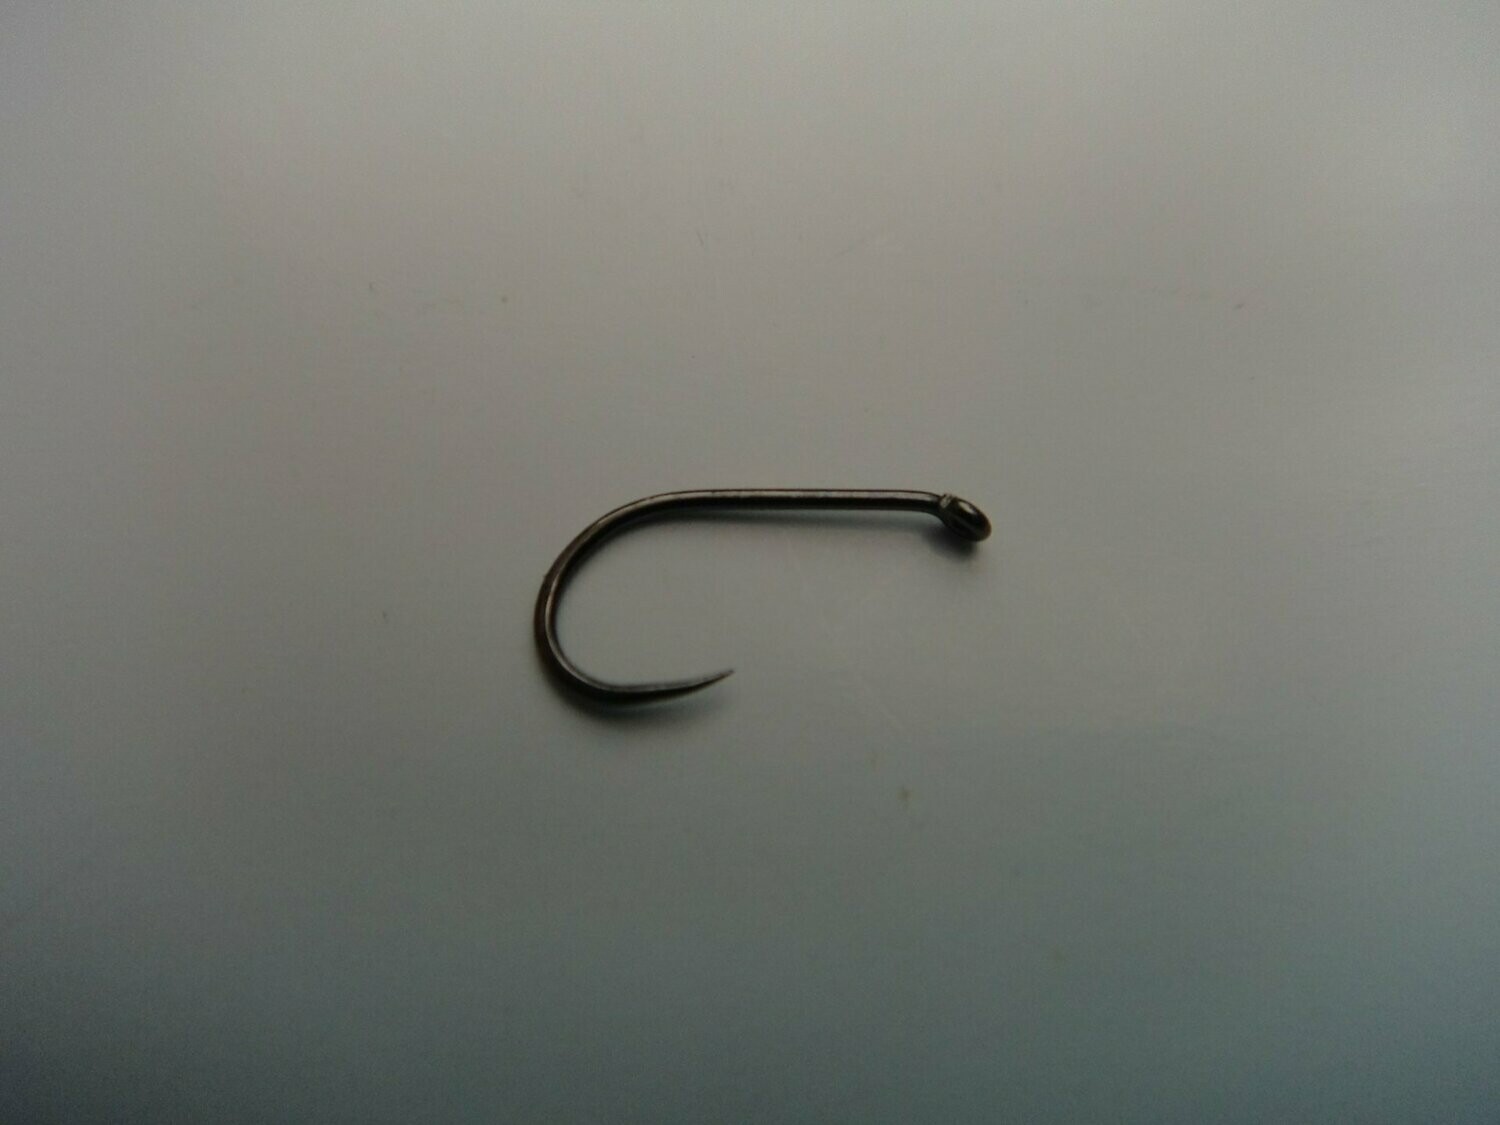 H and H barbless dry fly / nymph hook